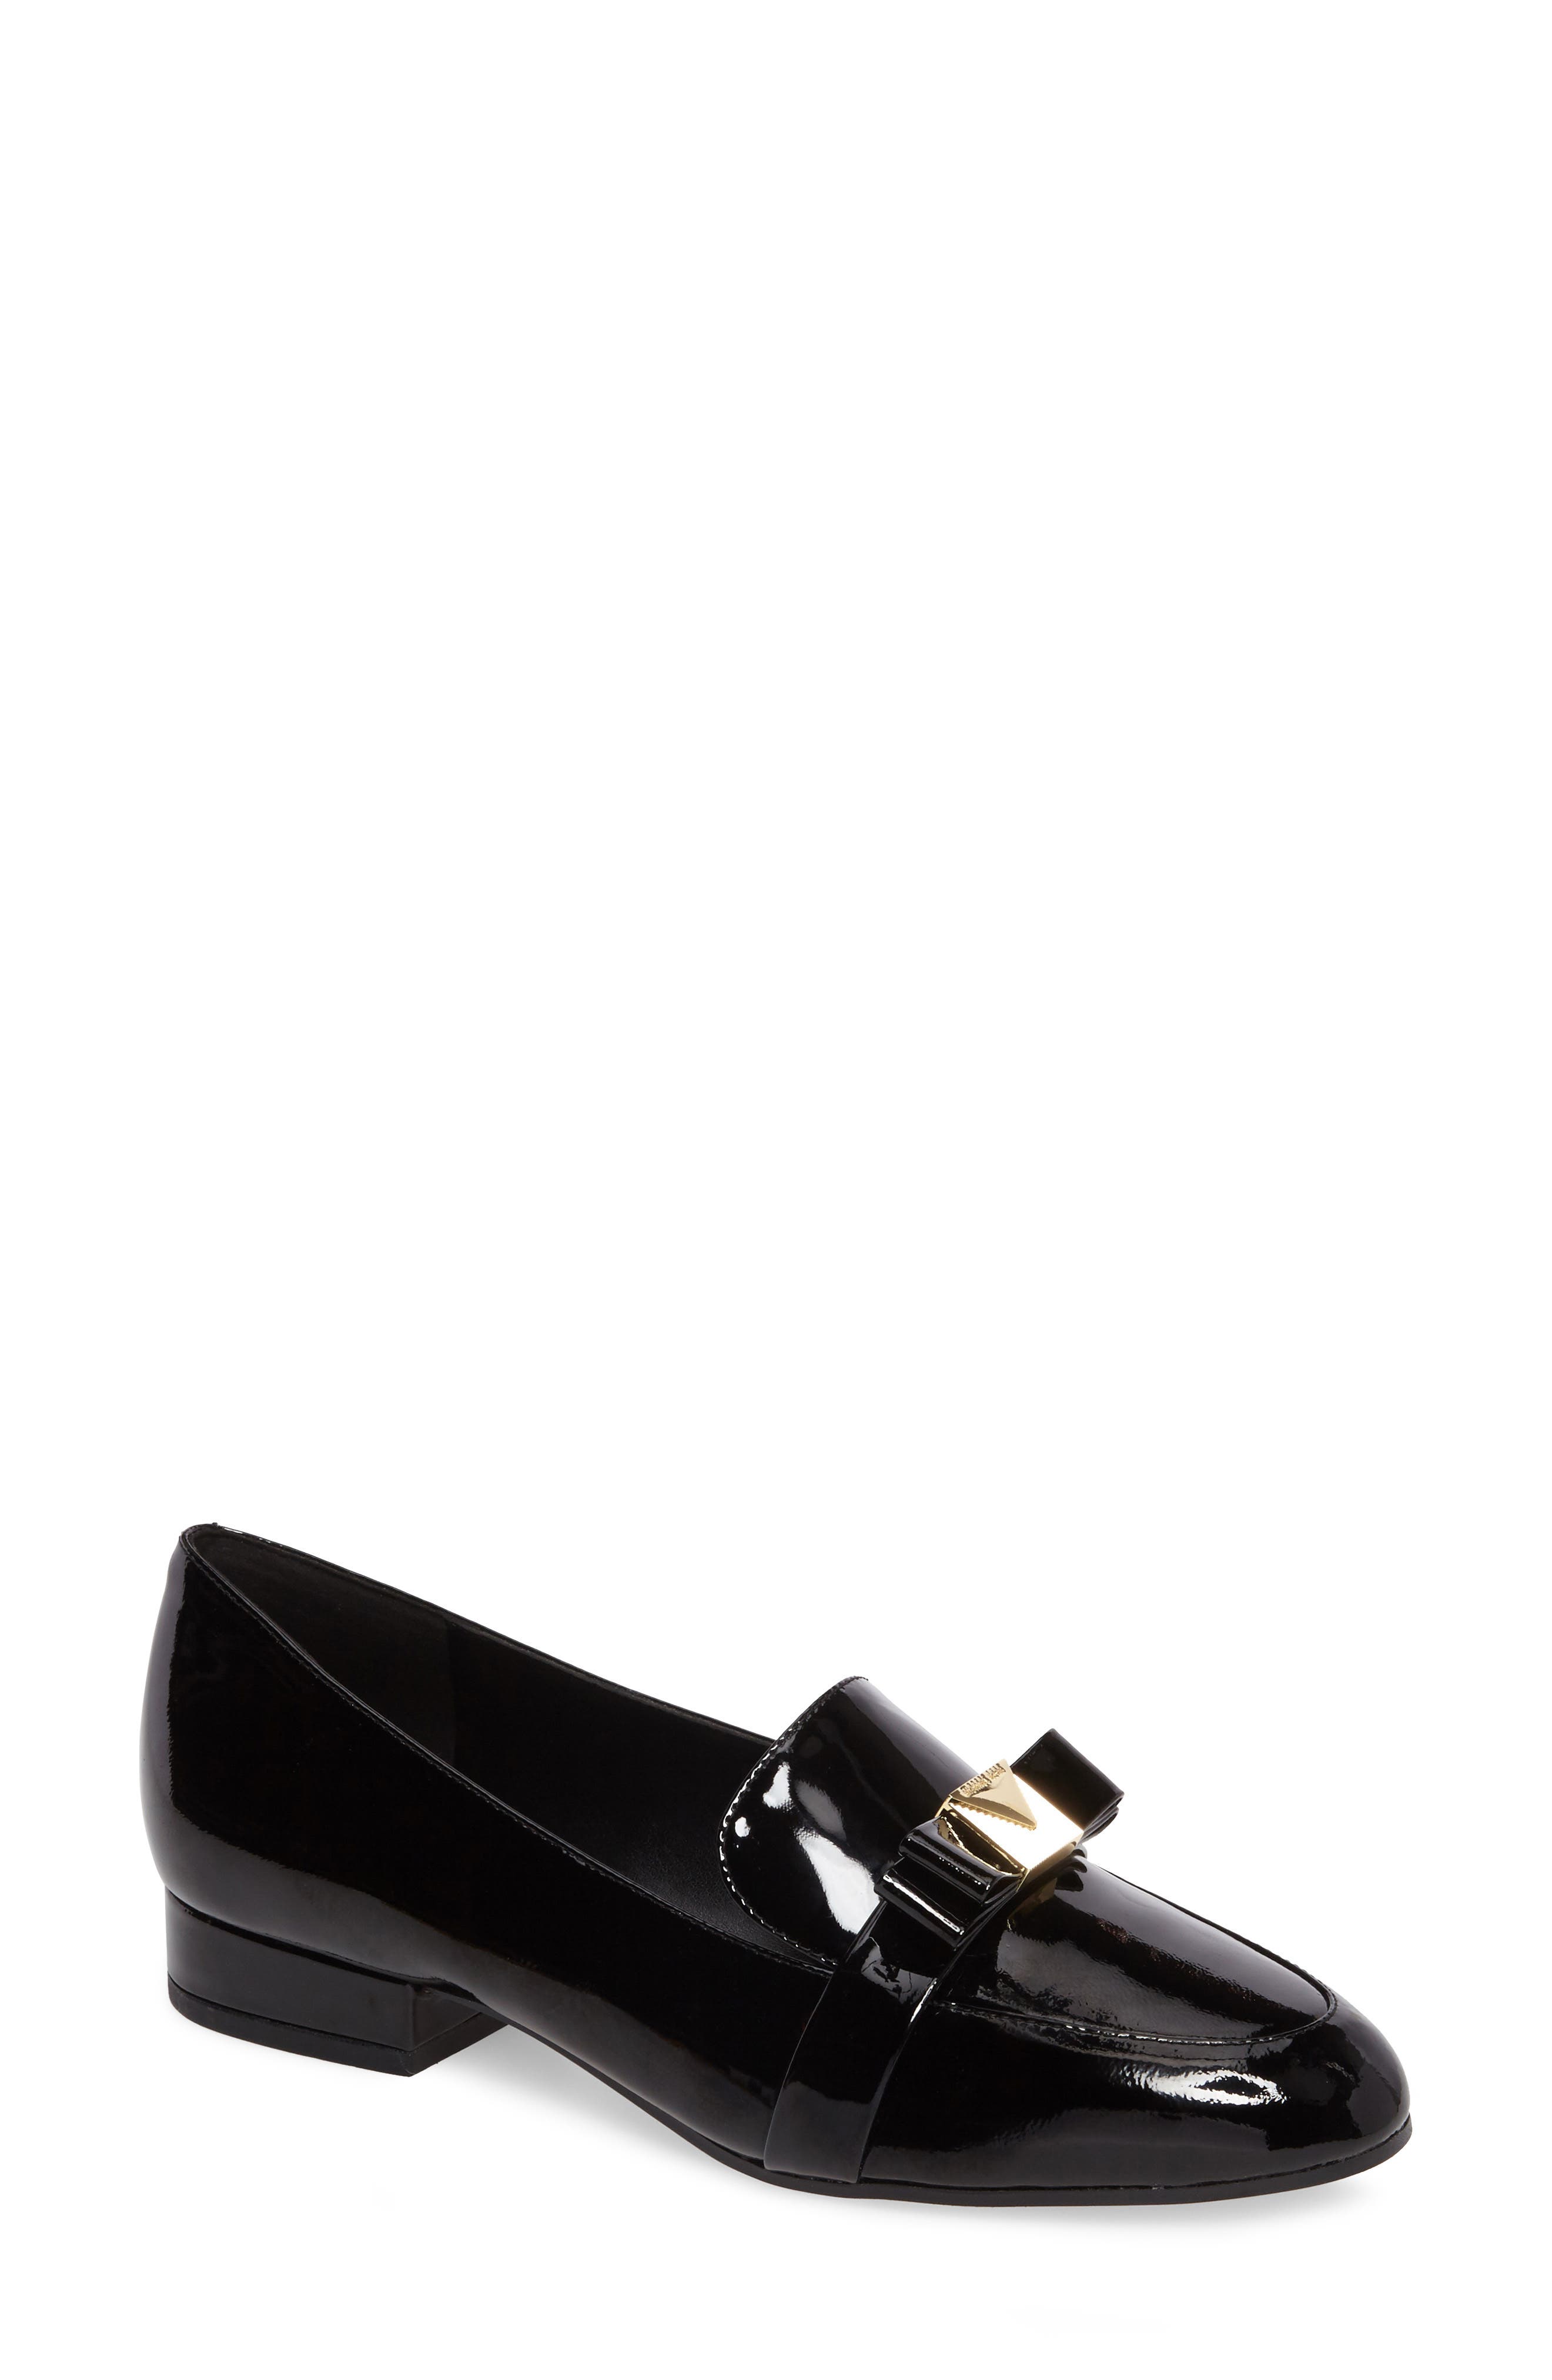 michael kors loafers womens for sale